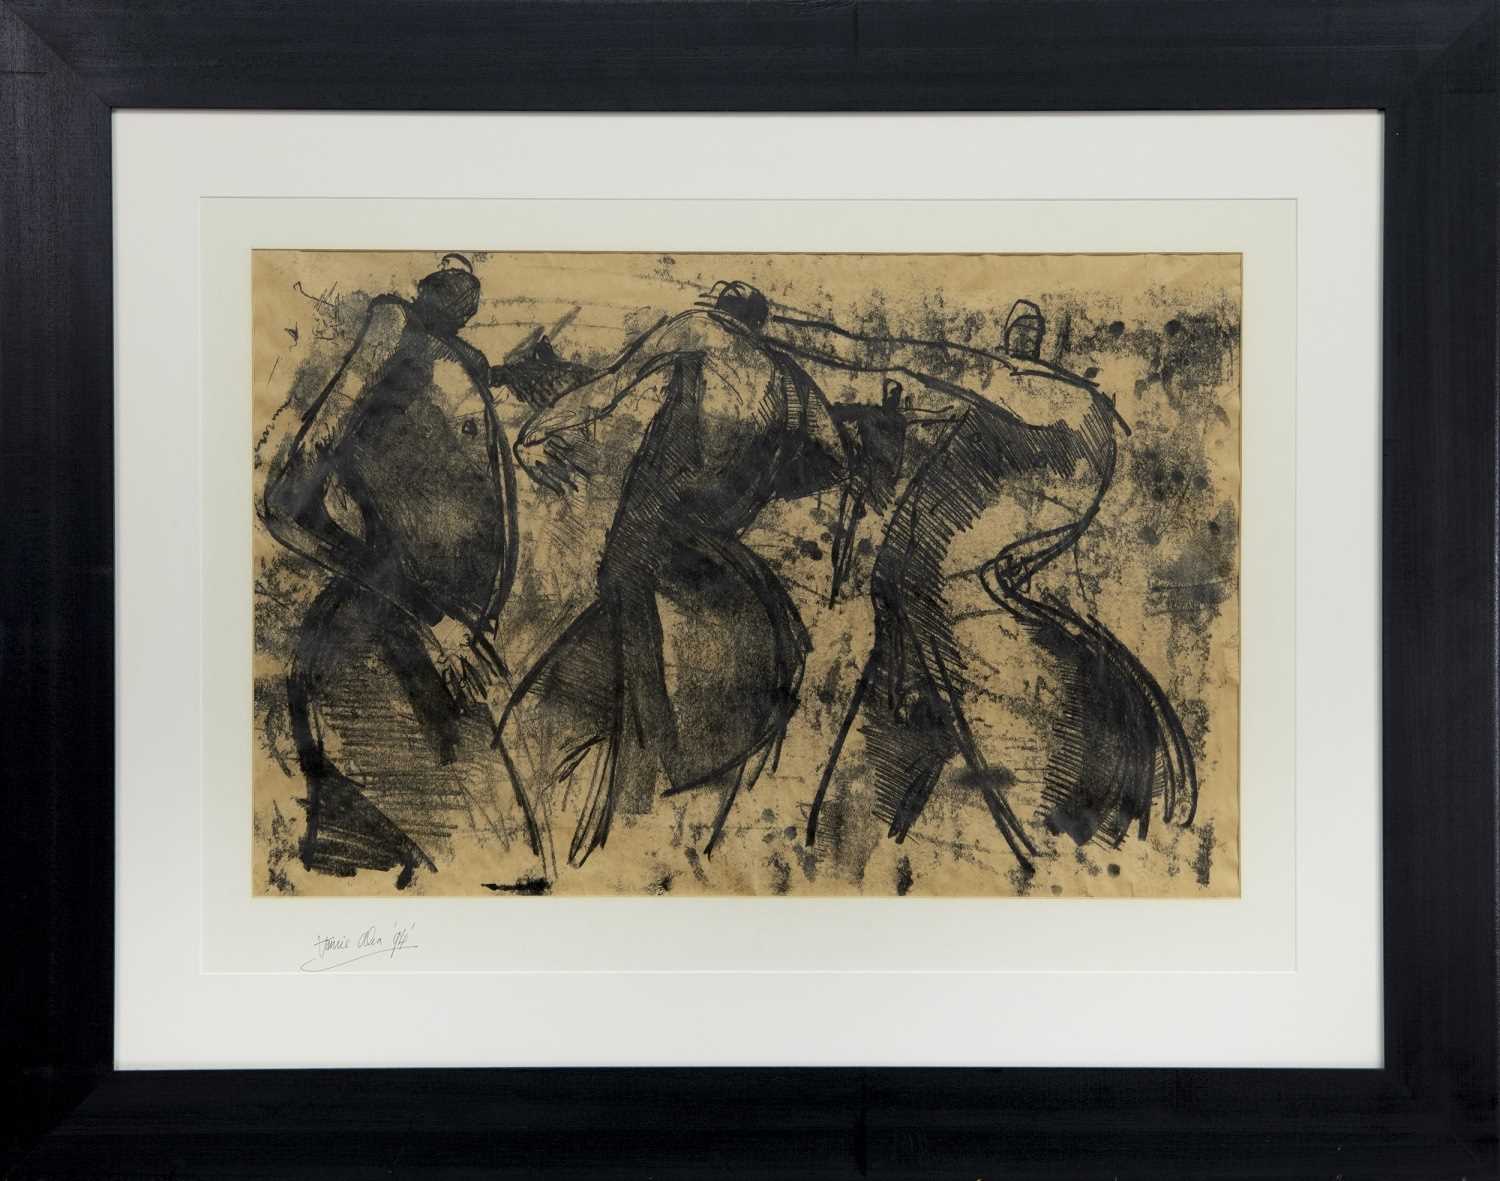 FIGURES IN MOTION, A CHARCOAL BY JAMIE O'DEA